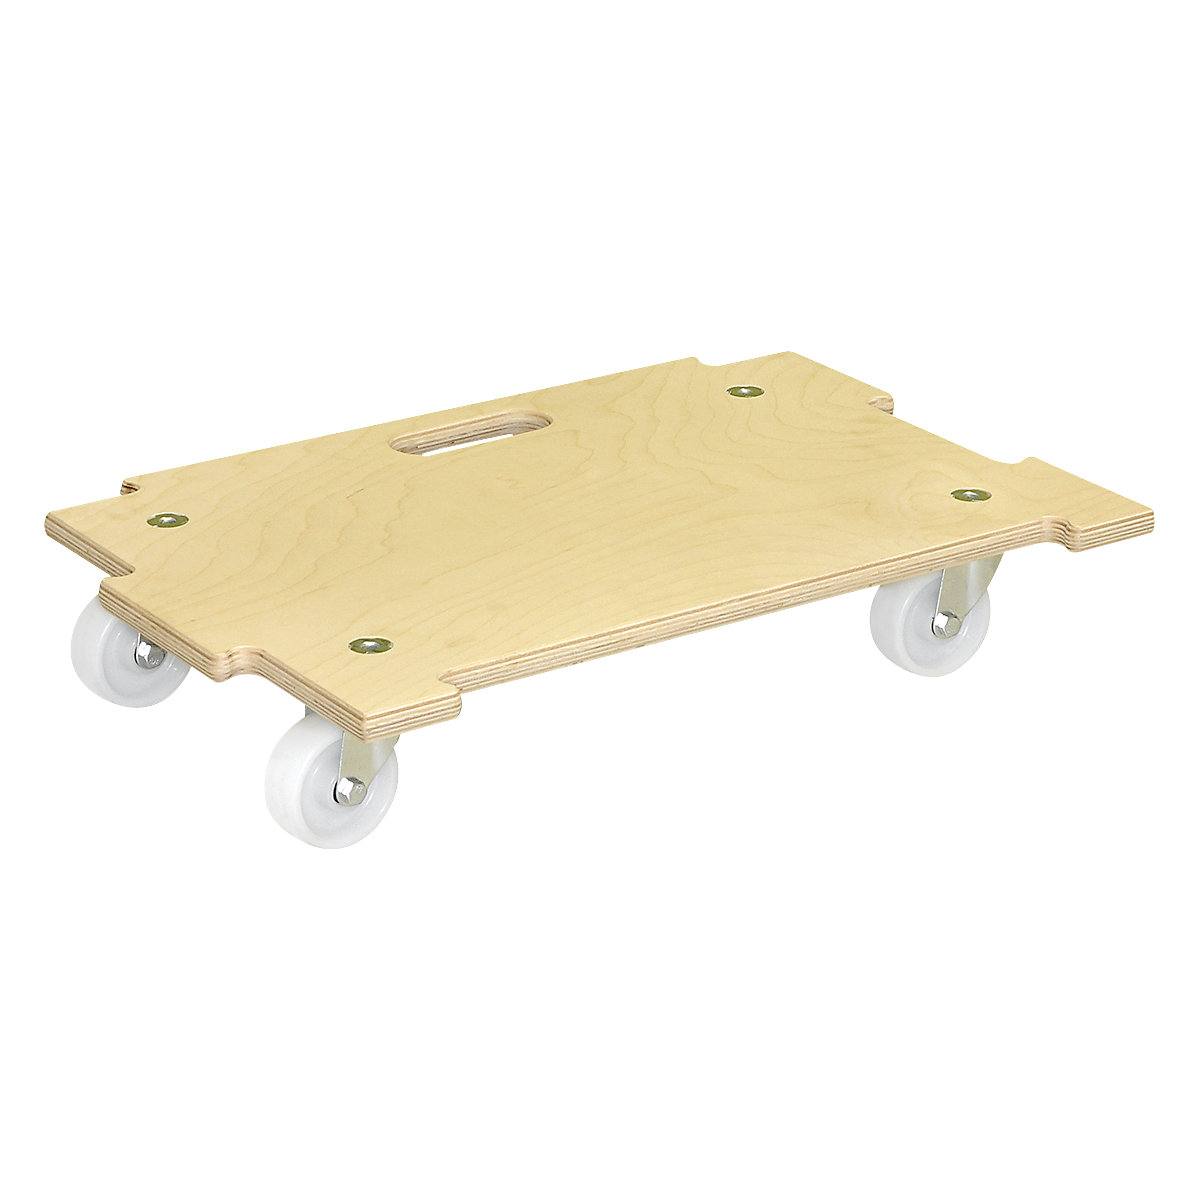 CONNECT MM 1382 transport dolly - Wagner